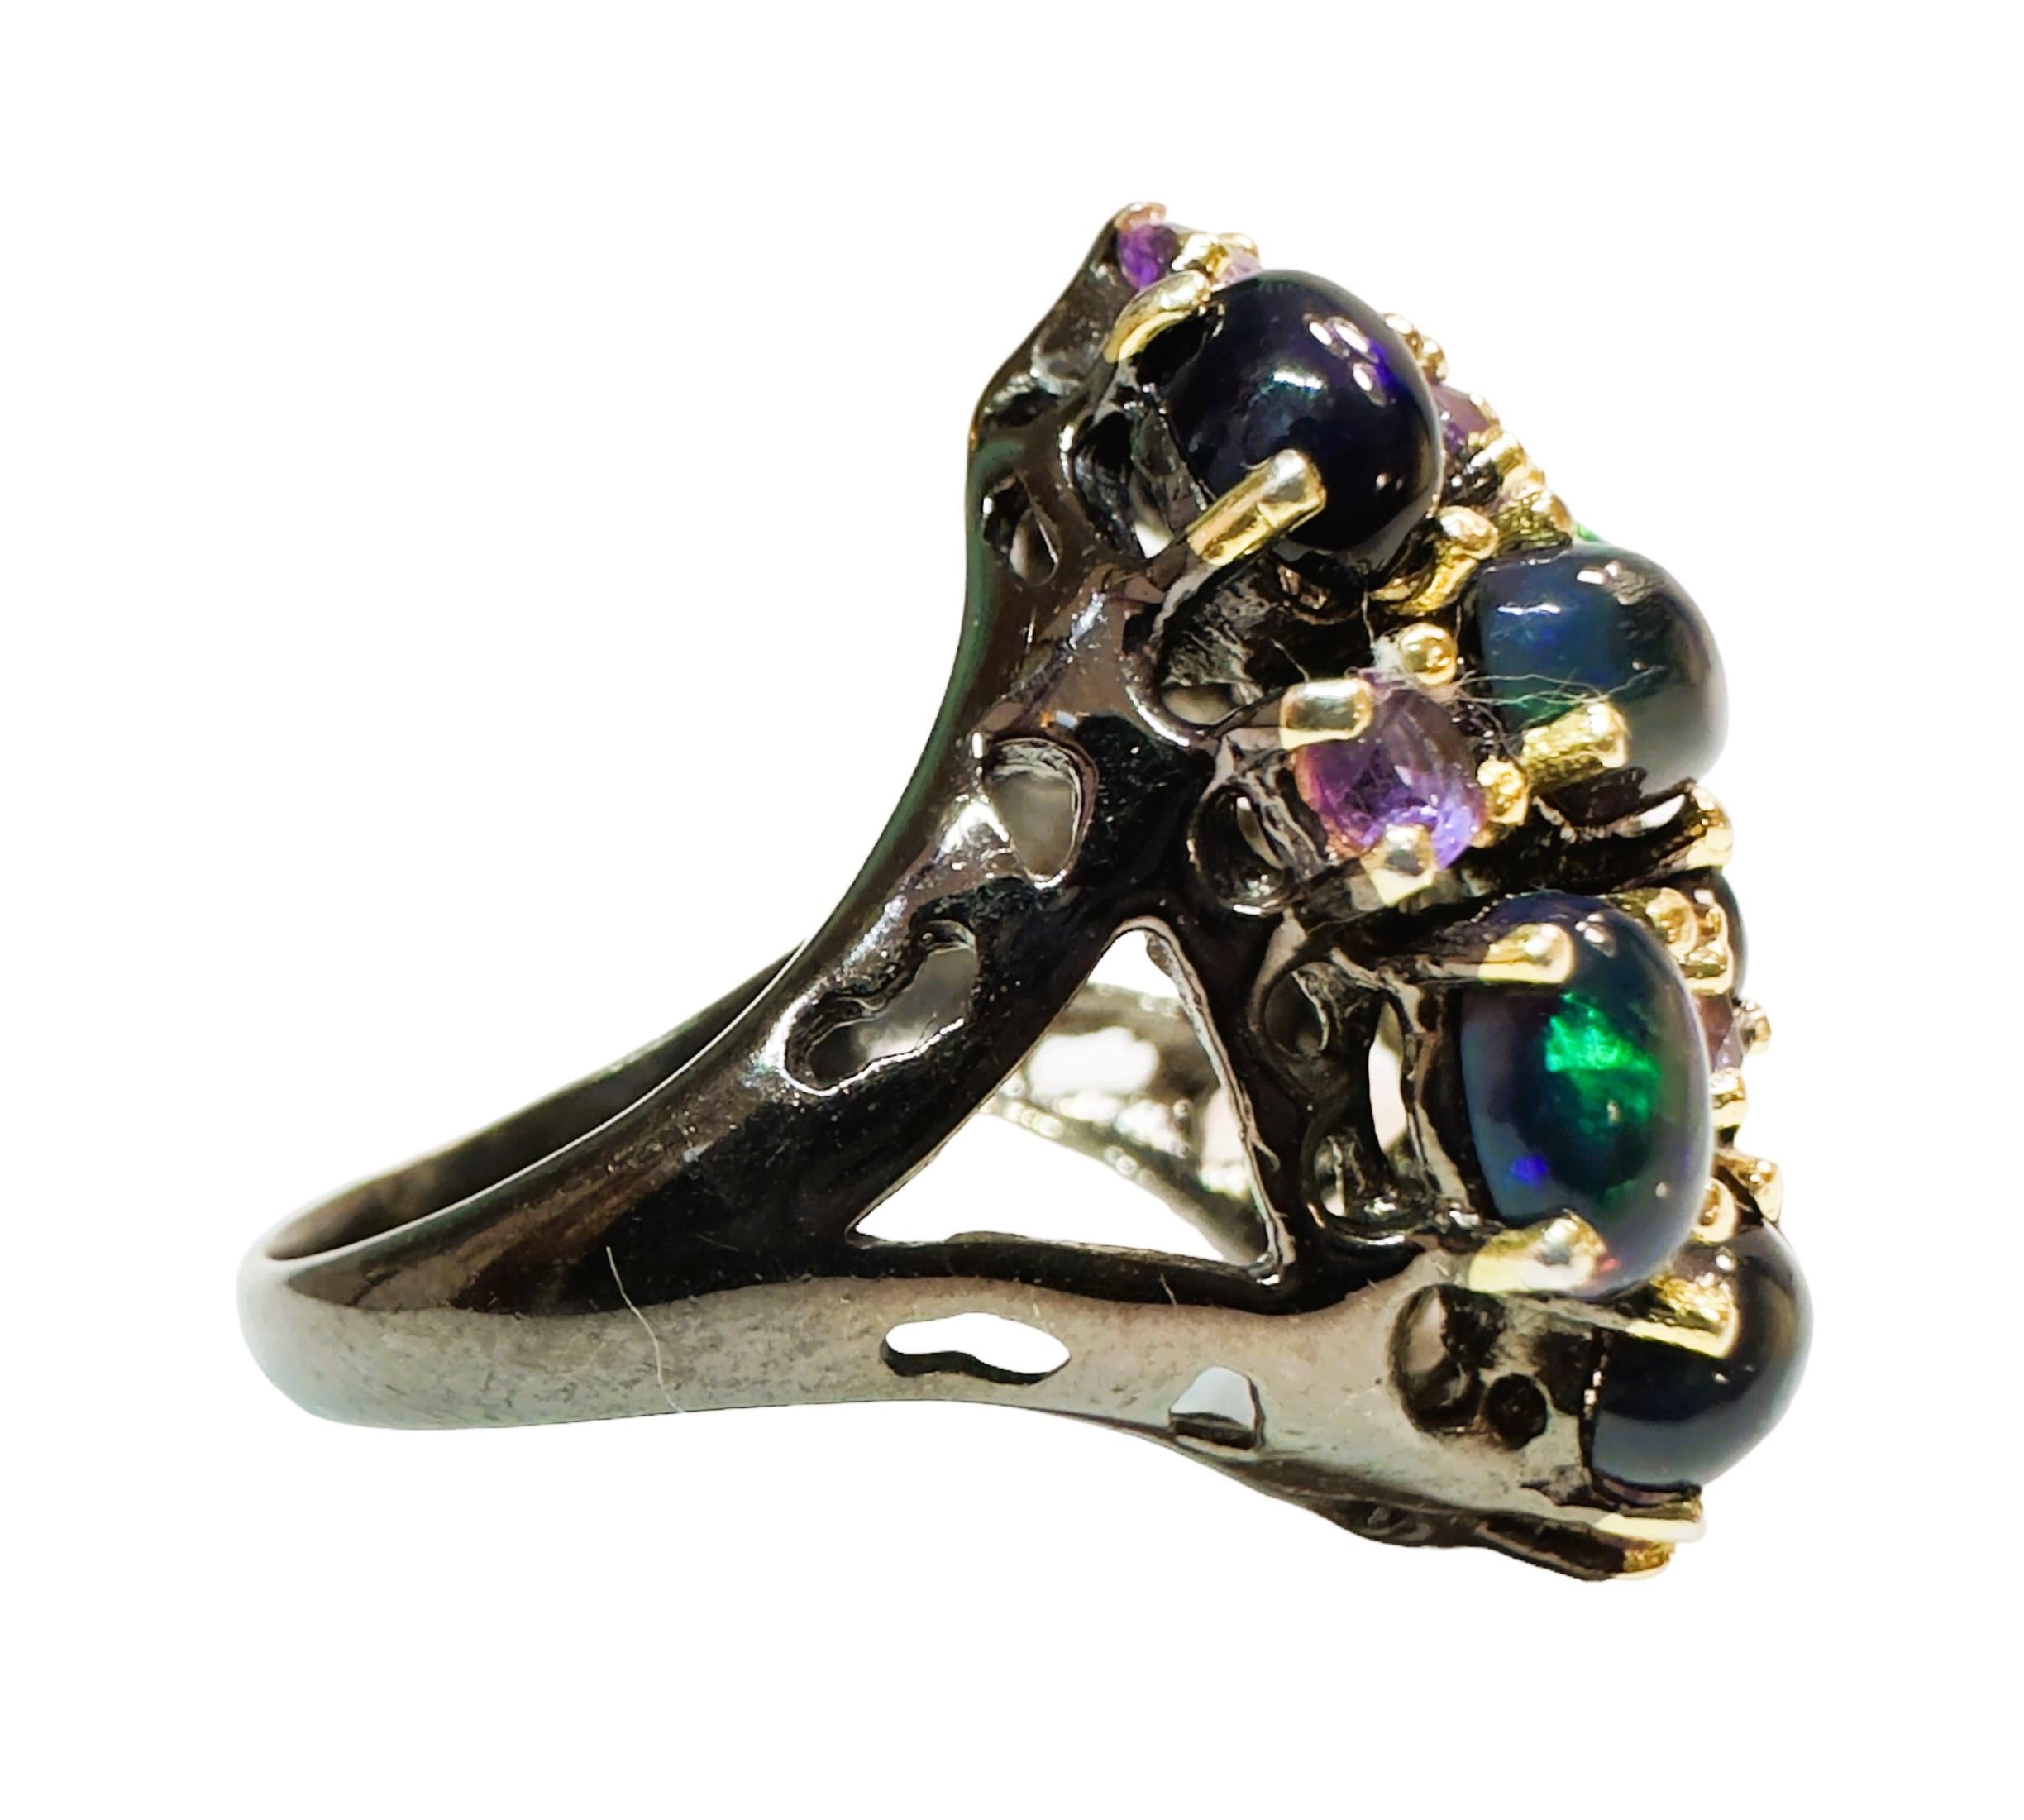 New Handmade Ethiopian Black Opal & Amethyst Ring in Oxi-black Sterling Silver In New Condition For Sale In Eagan, MN